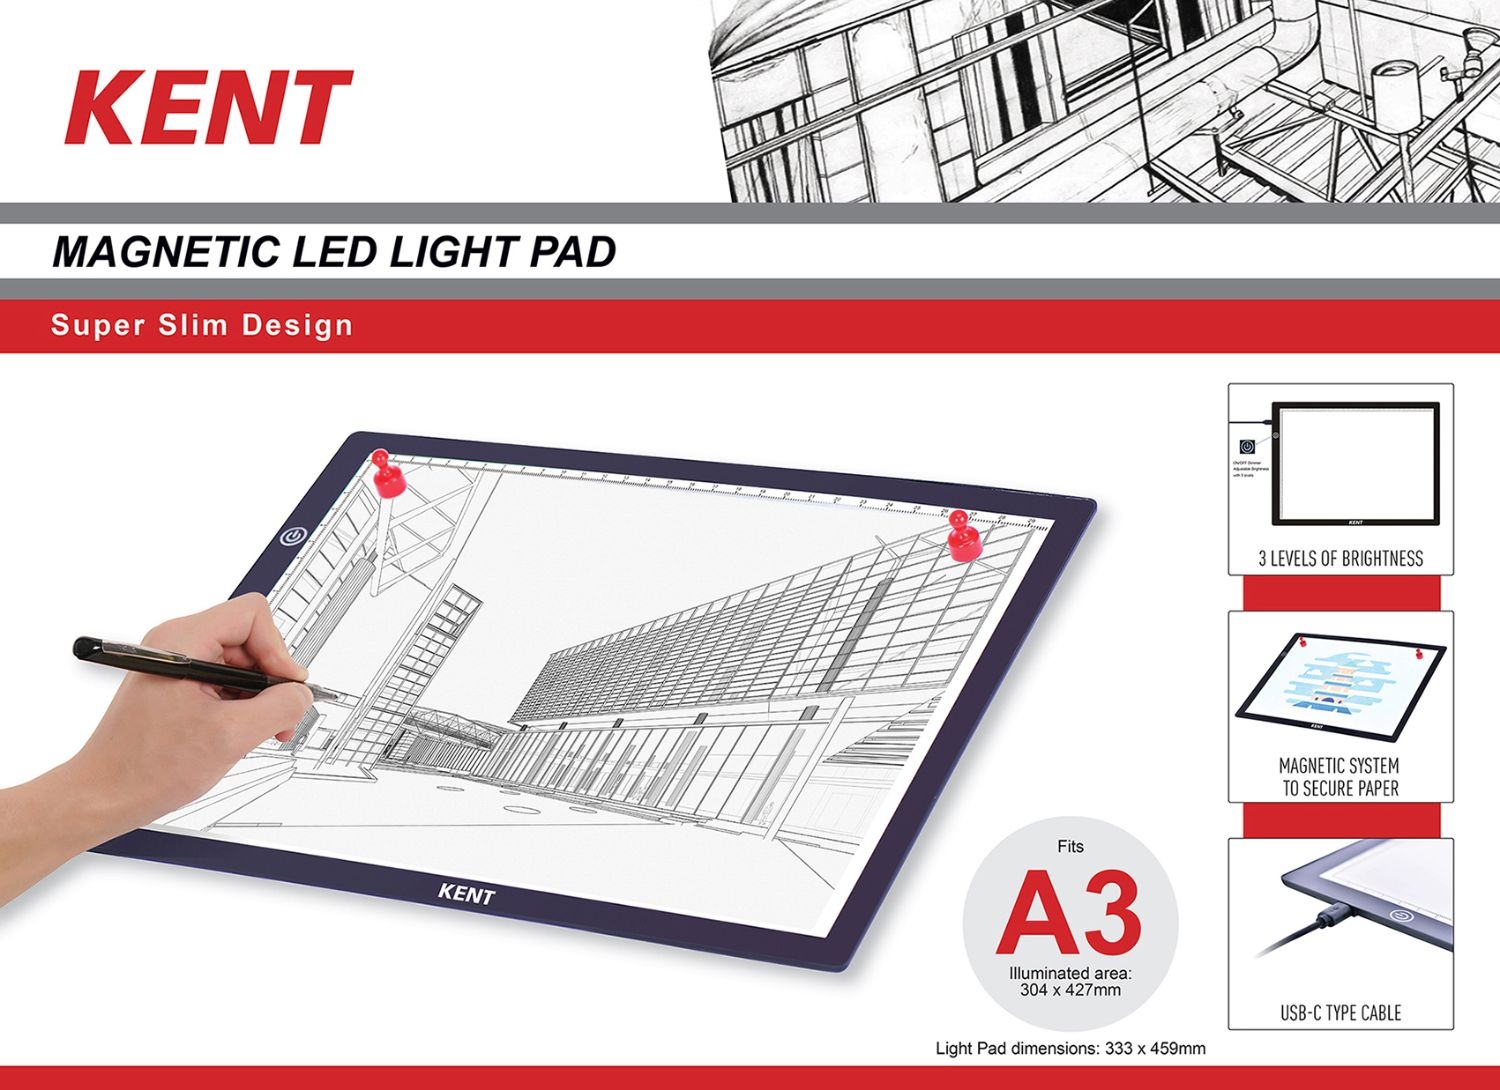 Kent Magnetic Led Light Pads A3 The